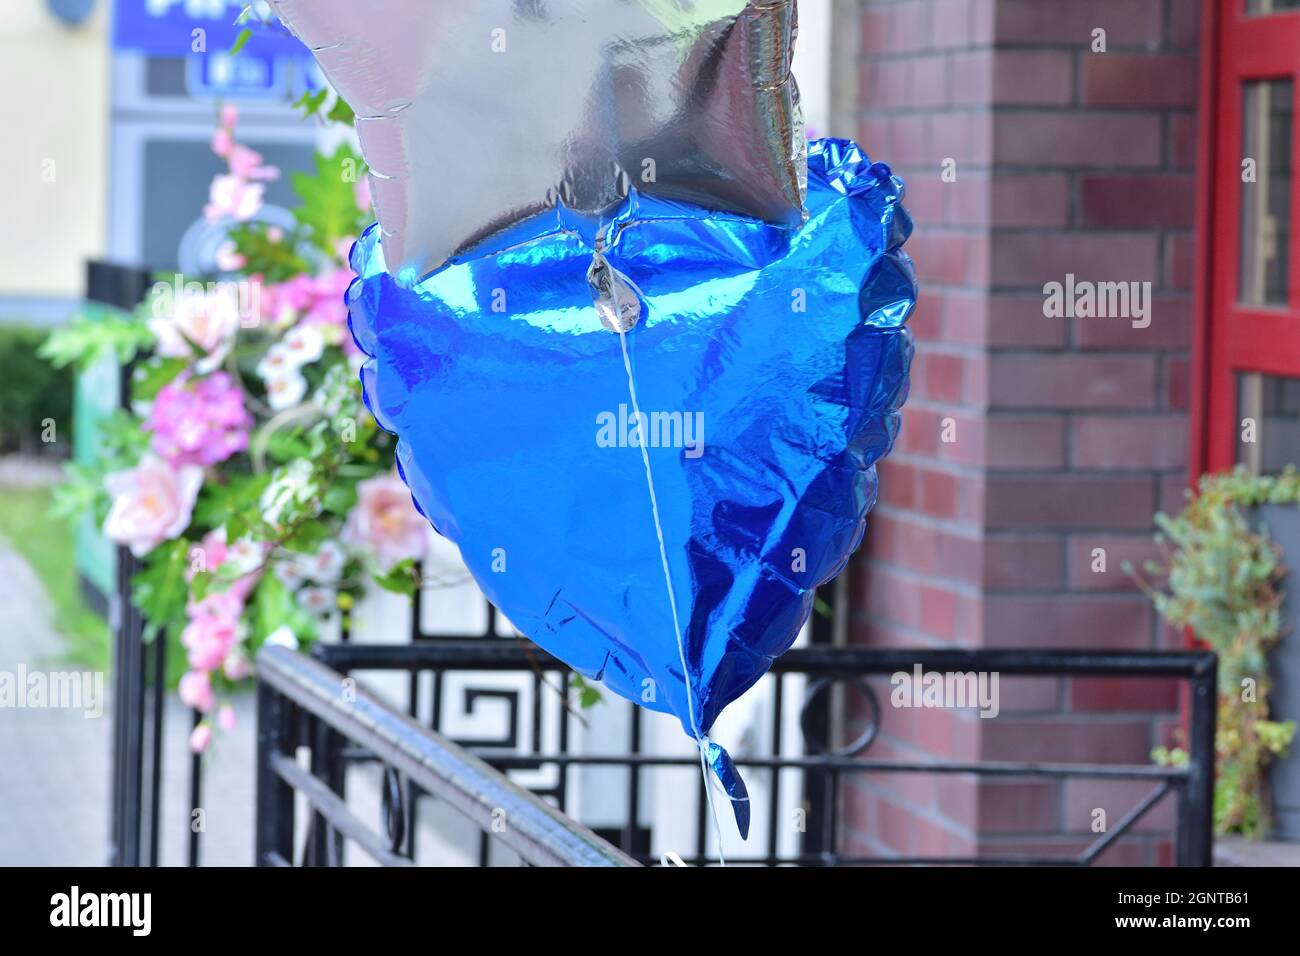 A silver and blue balloon tied to a metal railing against the background of traffic. Bokeh. Stock Photo